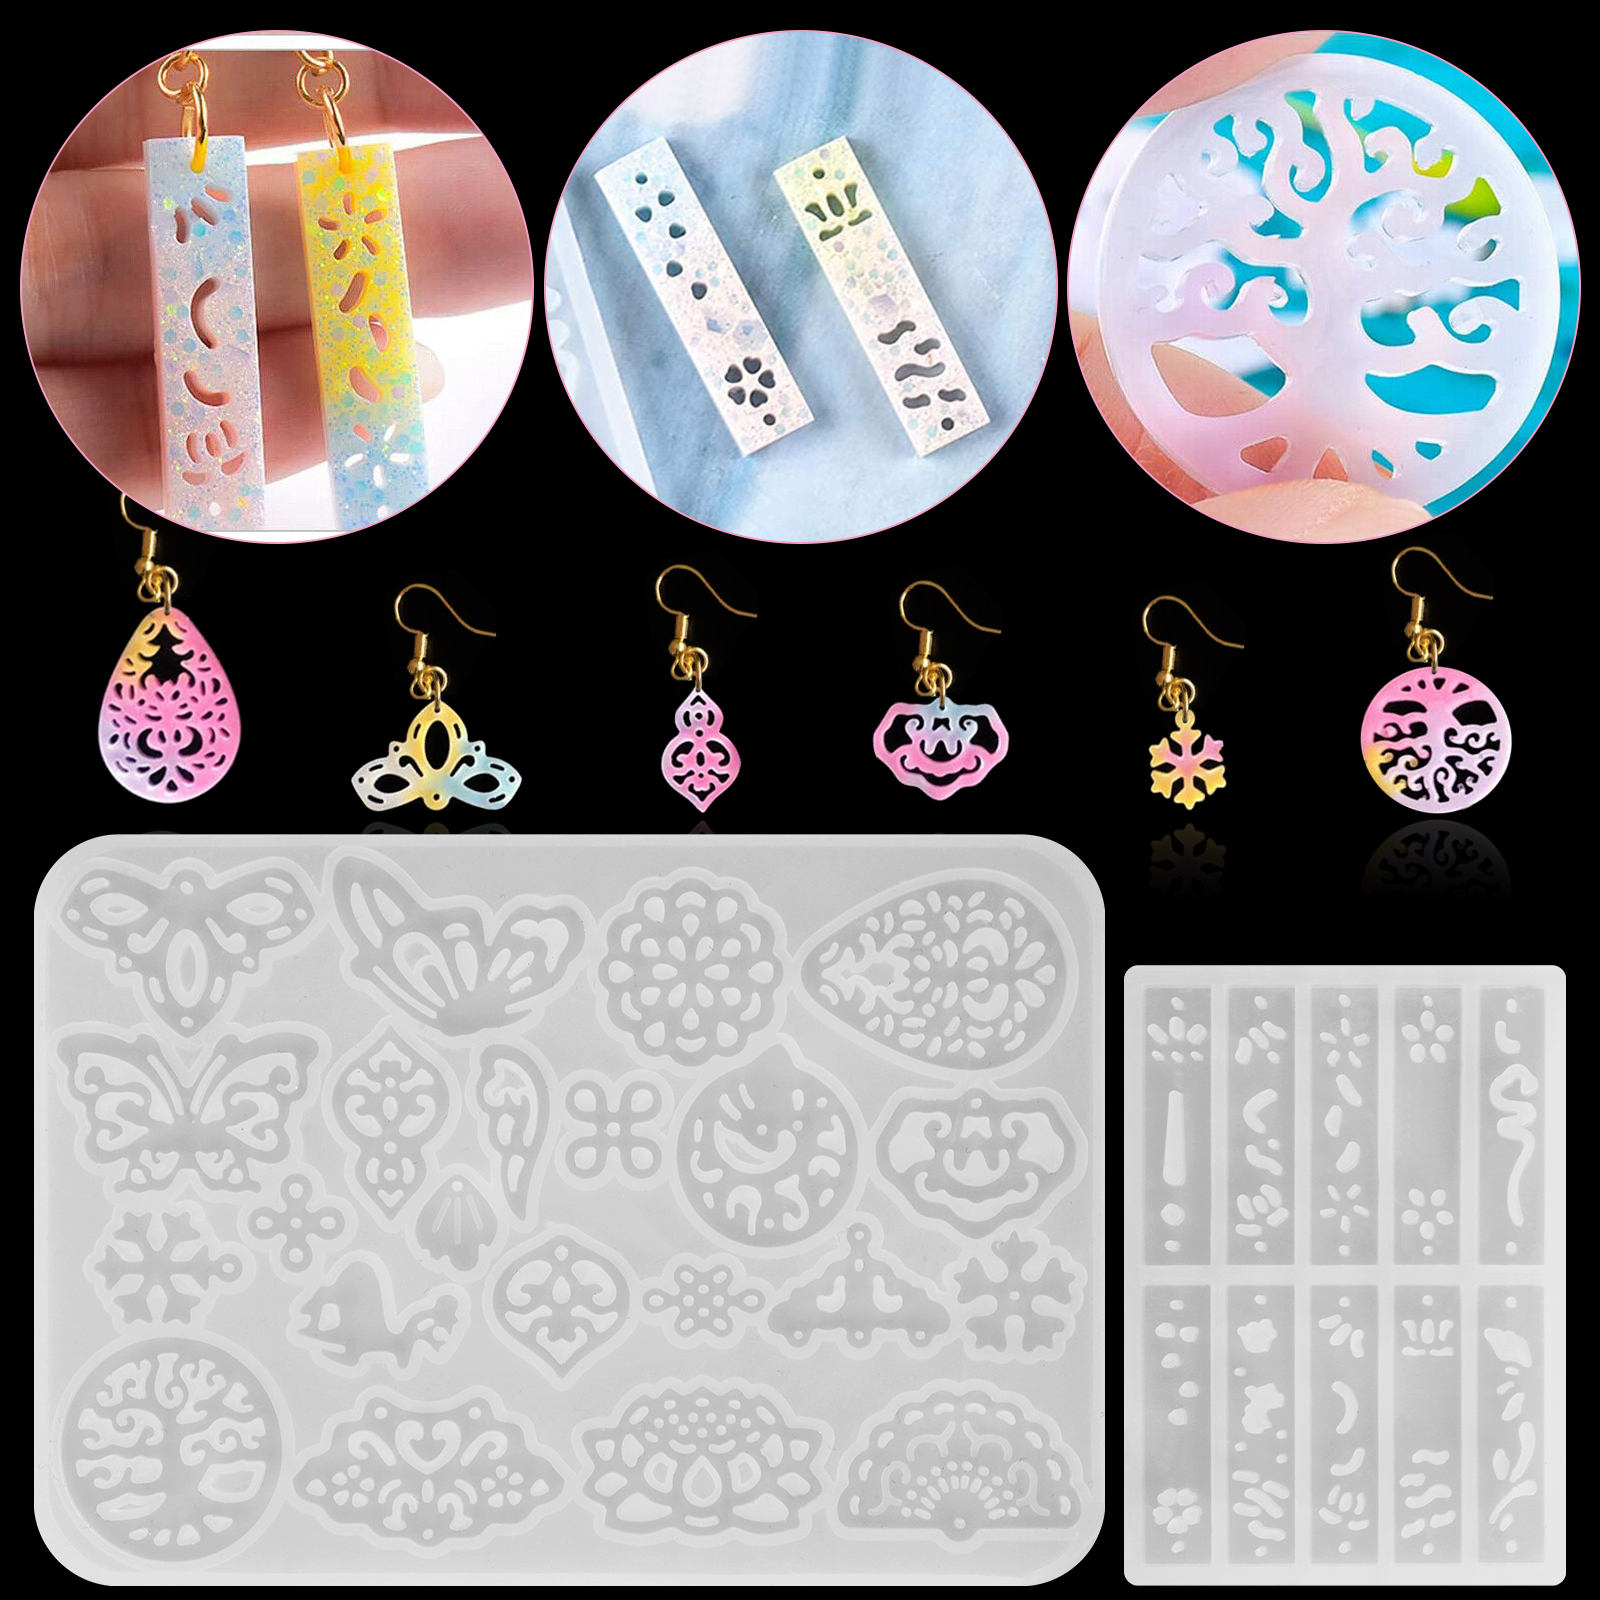 Silicone Resin Mold Jewelry Pendant Earring Mould DIY Making Epoxy Craft  Tool